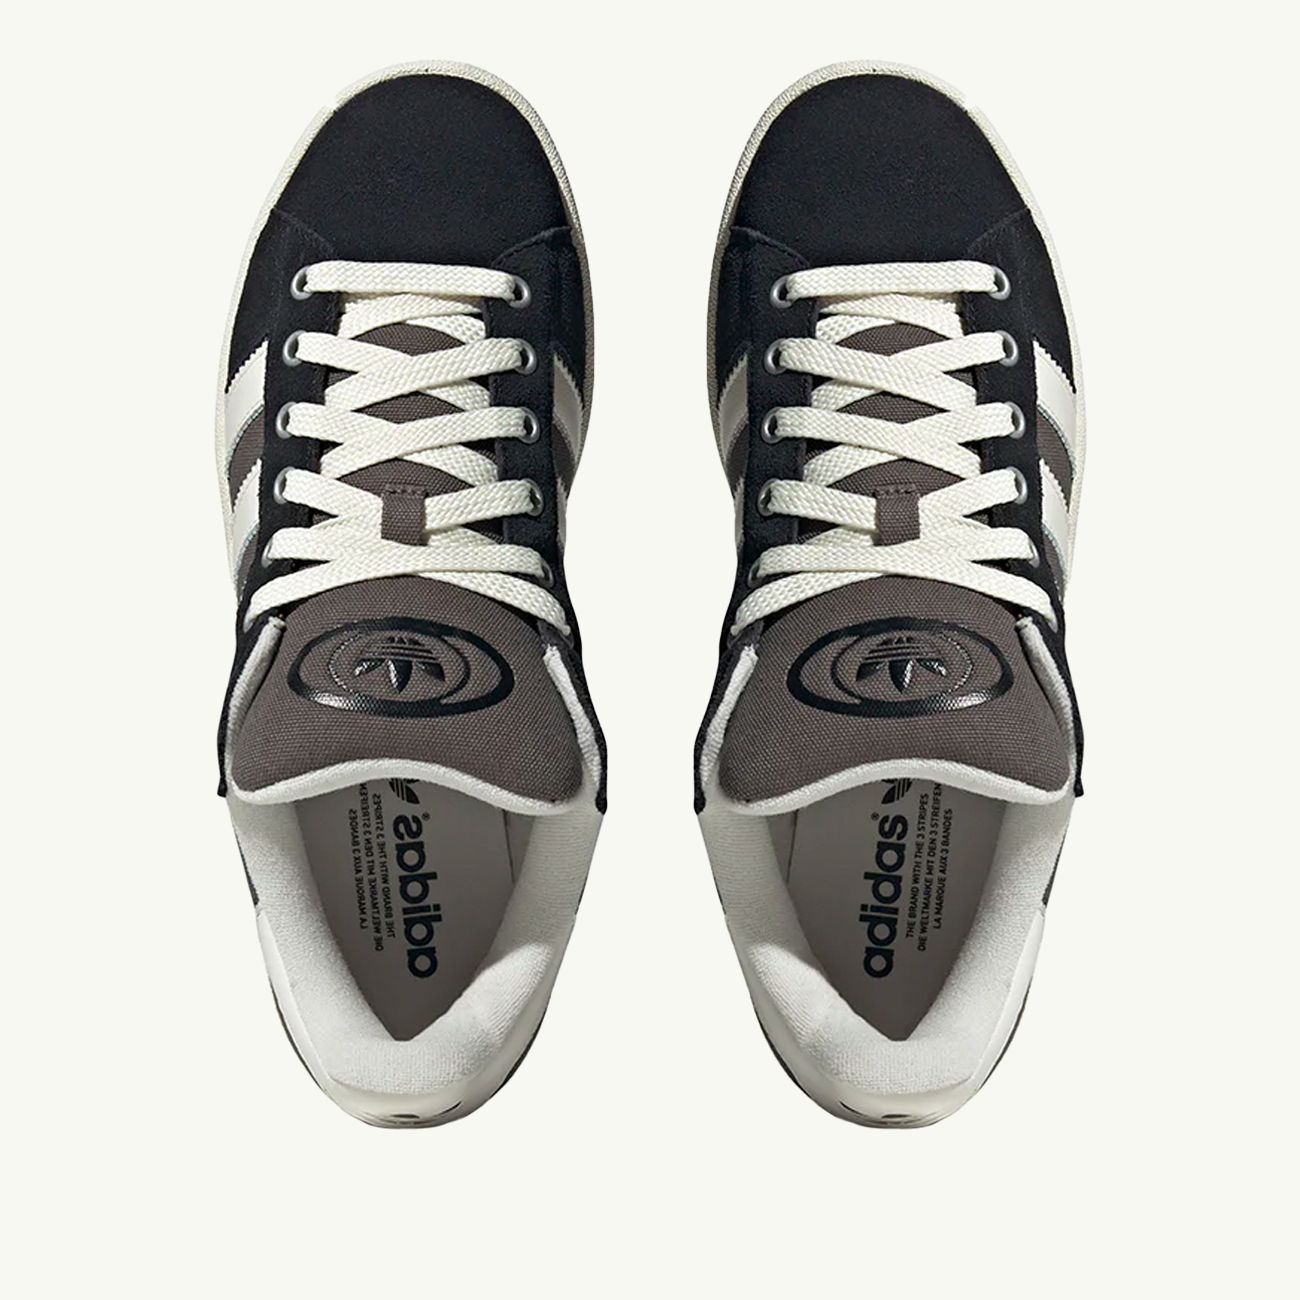 Campus 00s - Charcoal/White/Black